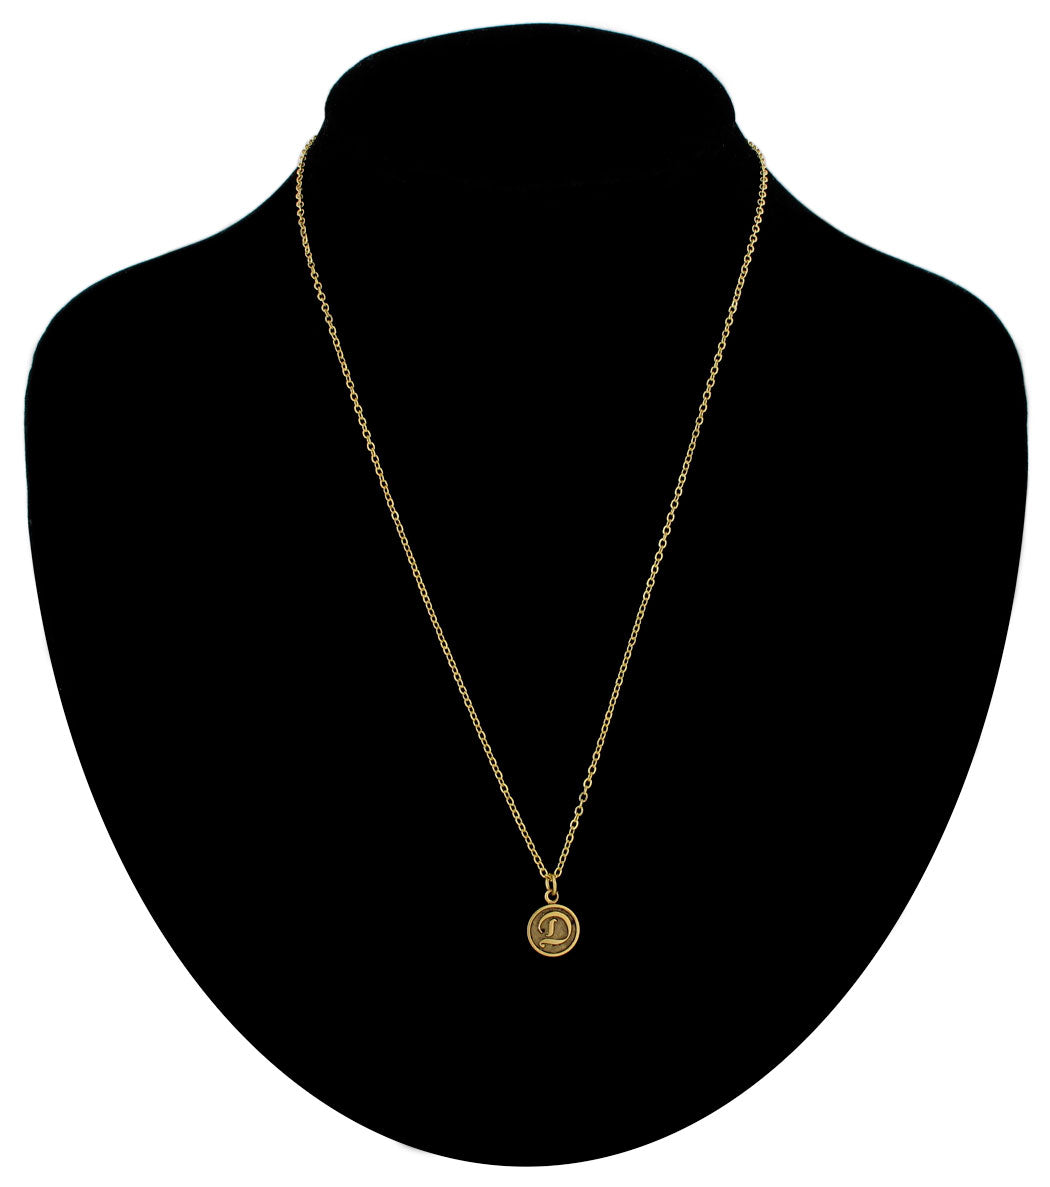 Ky & Co Made in USA Cursive Initial "D" Charm Chain Necklace 18" - Gold Tone